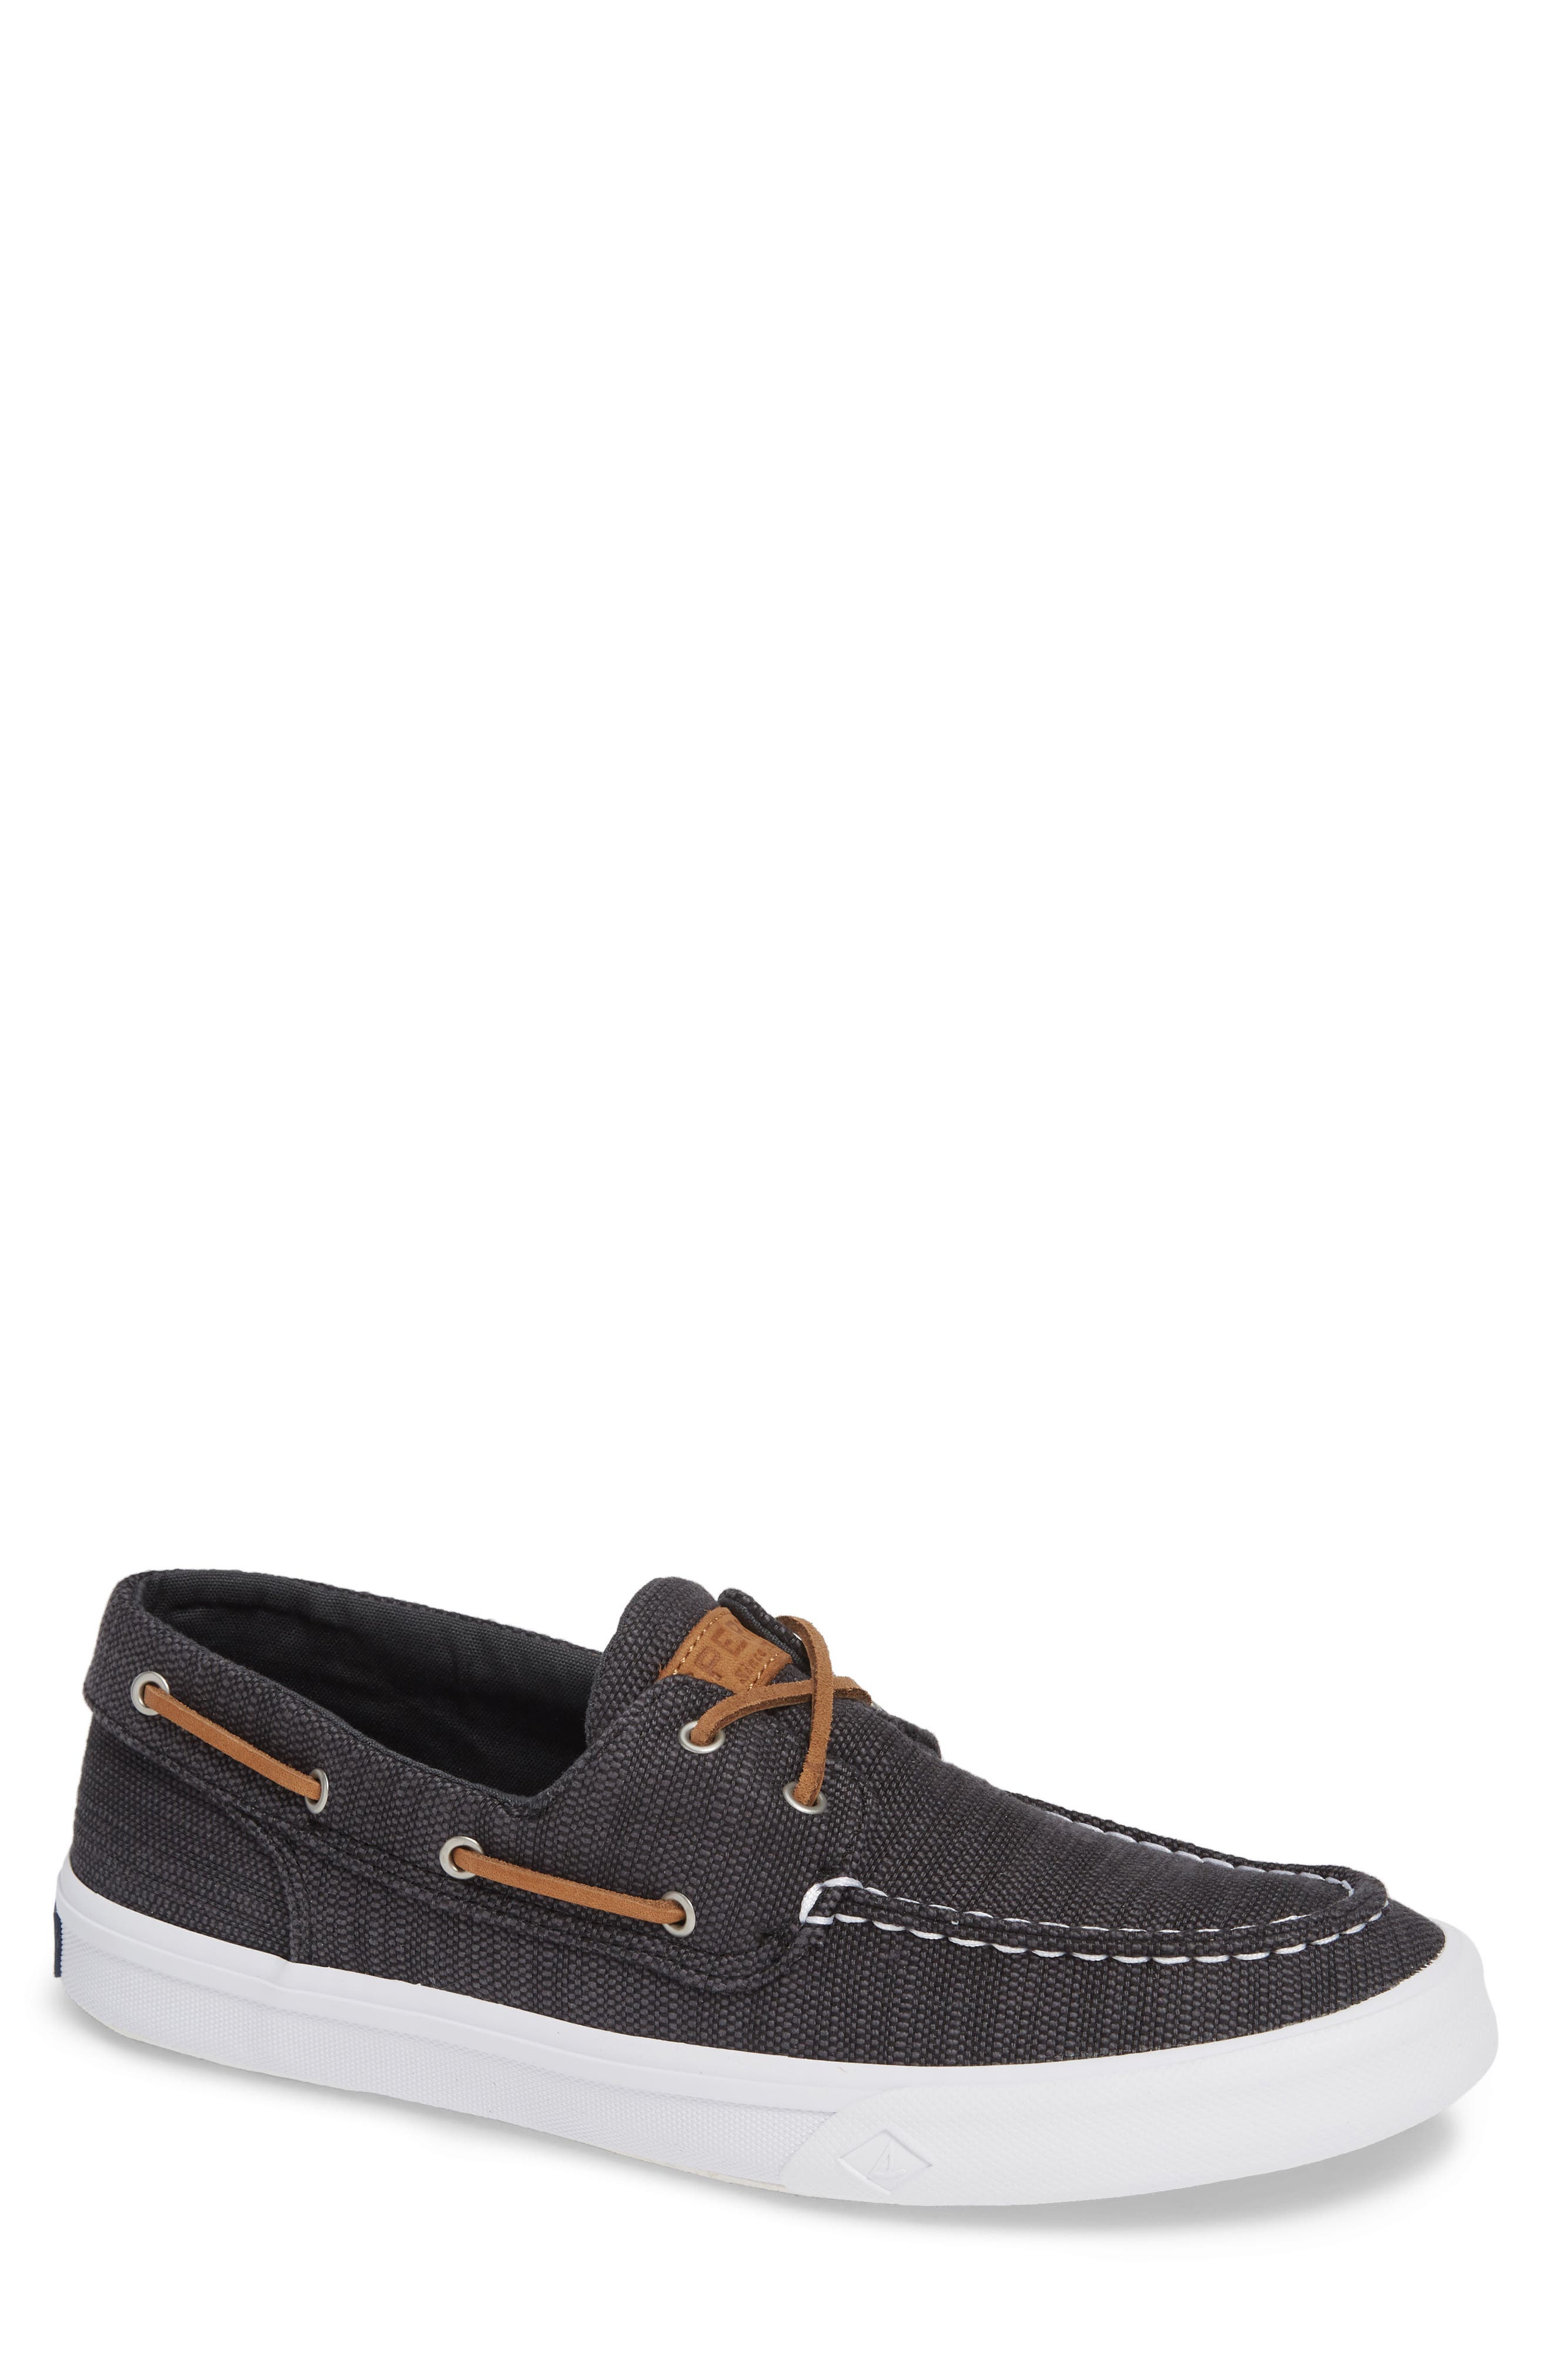 ross sperry shoes